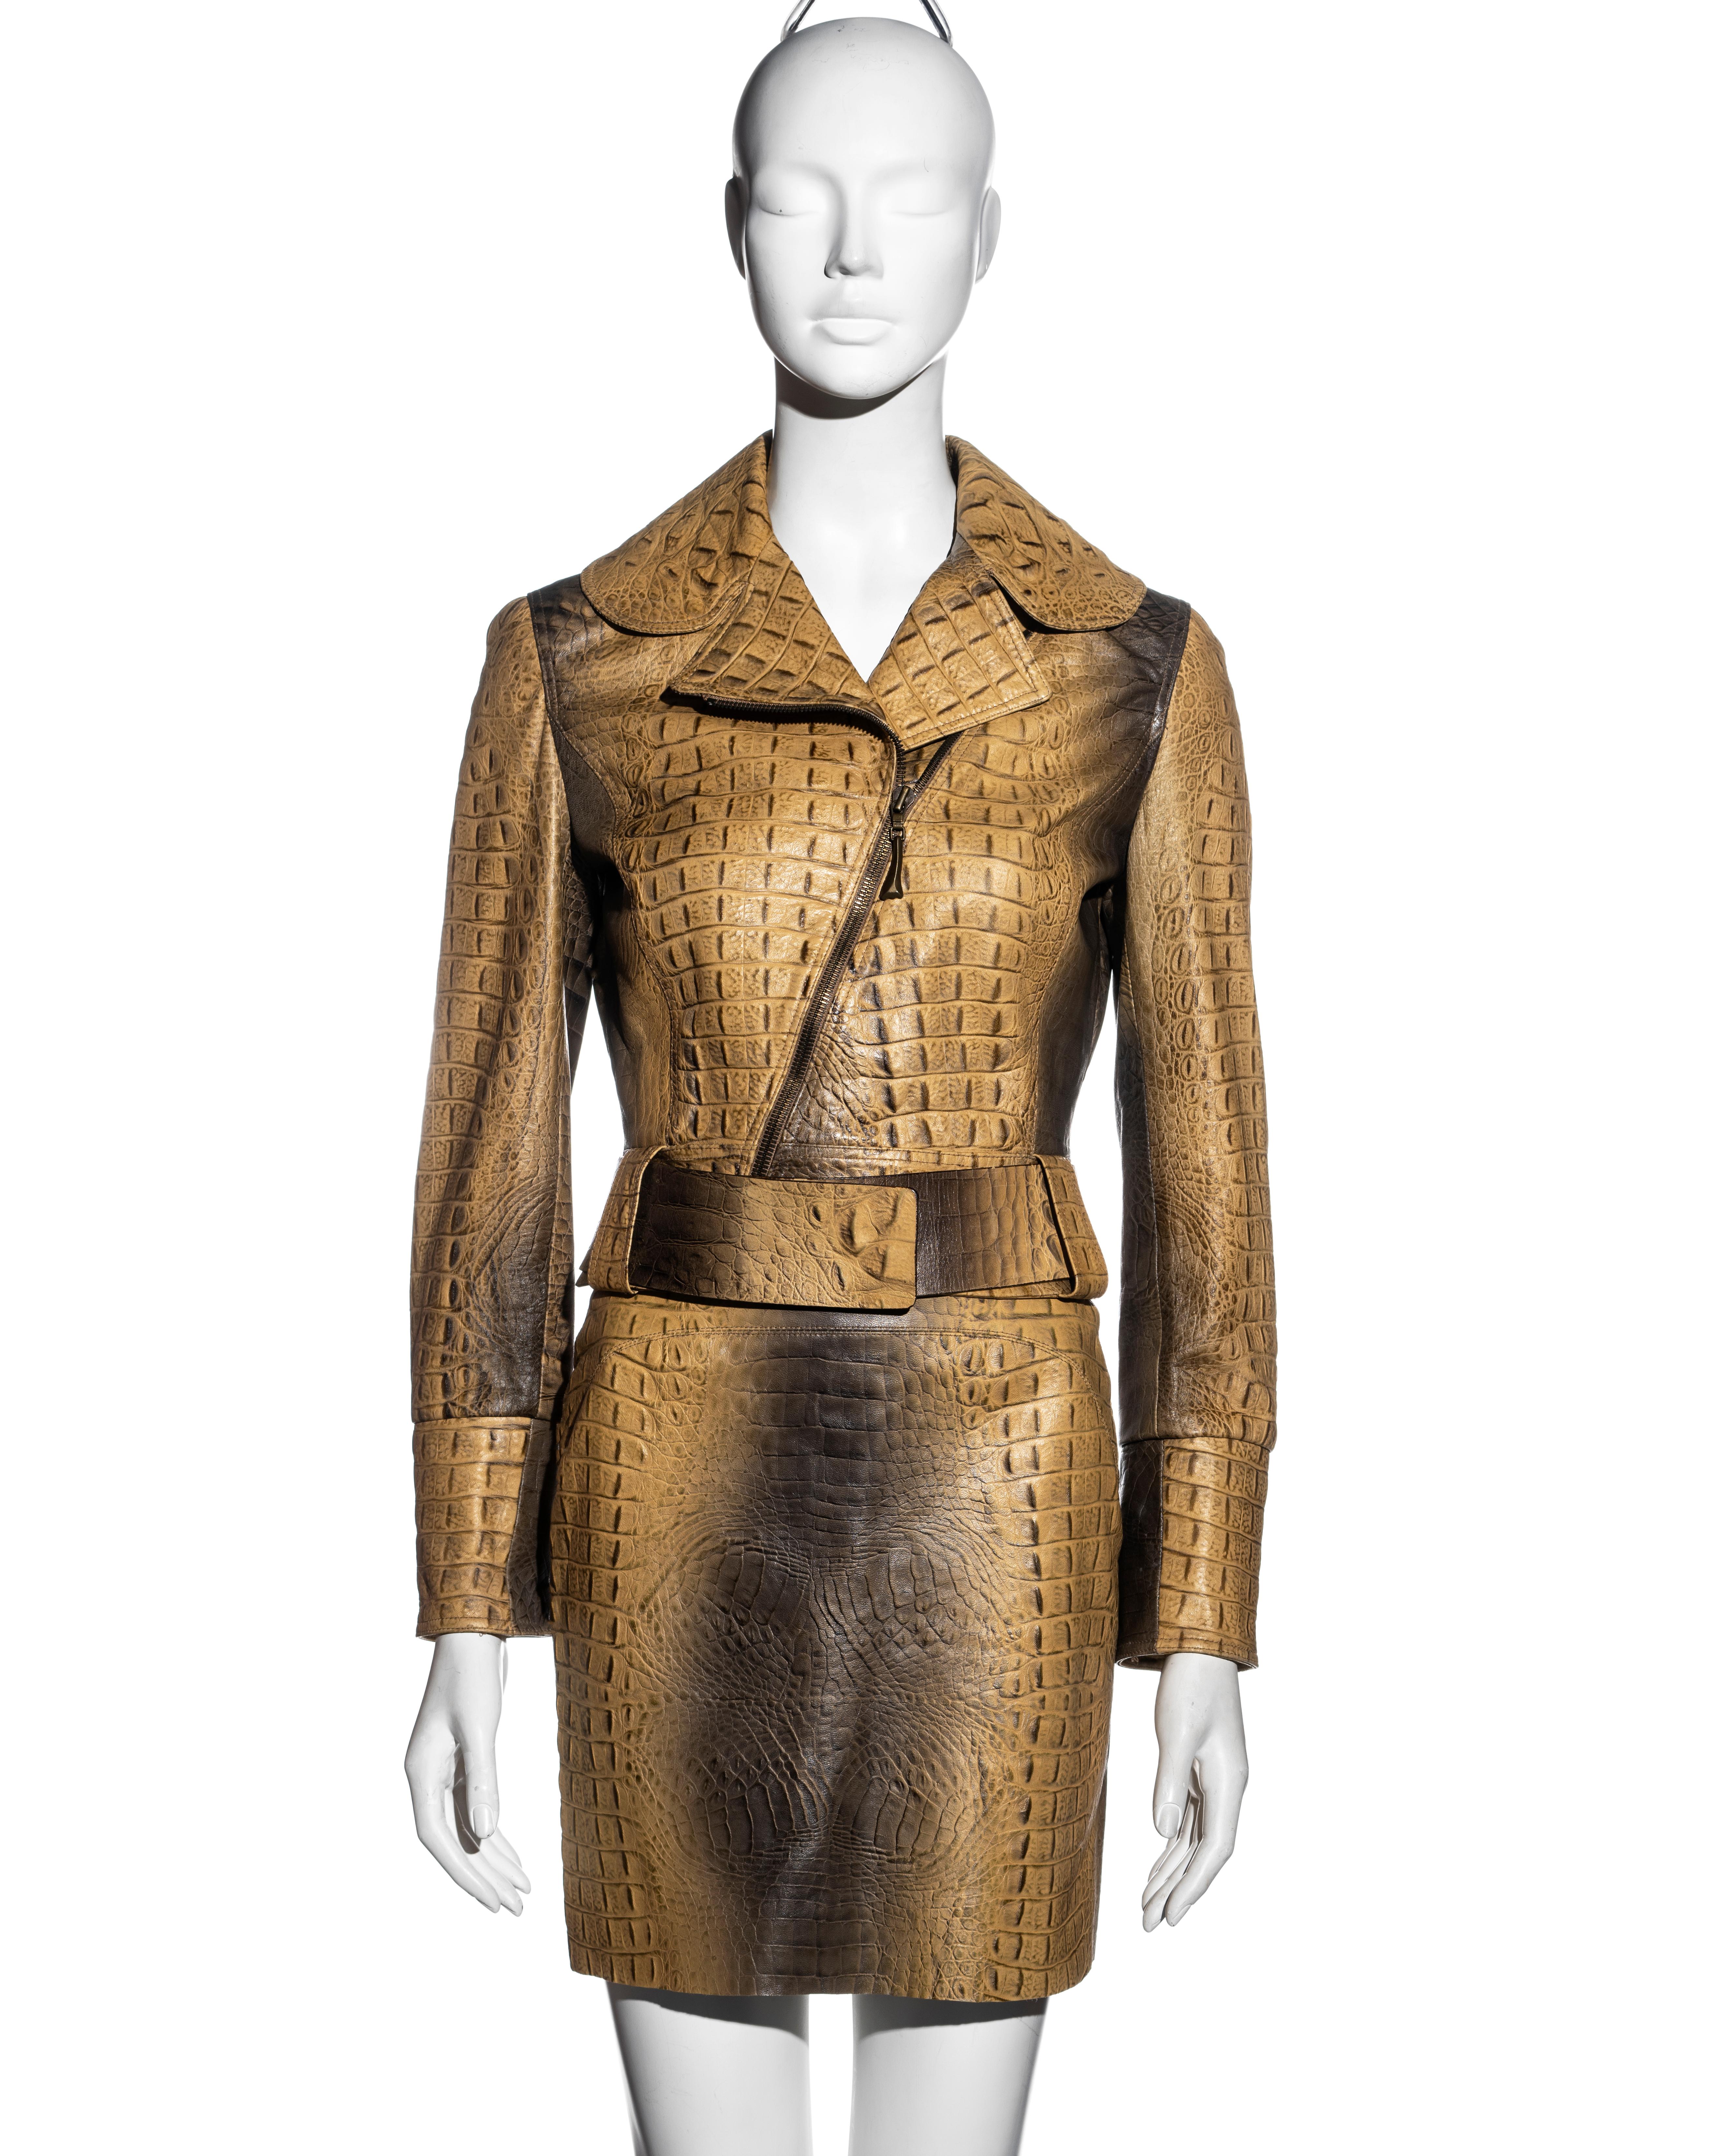 ▪ Roberto Cavalli beige croc-embossed leather 2-piece set 
▪ Fitted leather jacket
▪ High-waisted mini skirt 
▪ Matching wide belt 
▪ Jacket: Small, Skirt: Extra Small
▪ Fall-Winter 2000
▪ 100% Leather